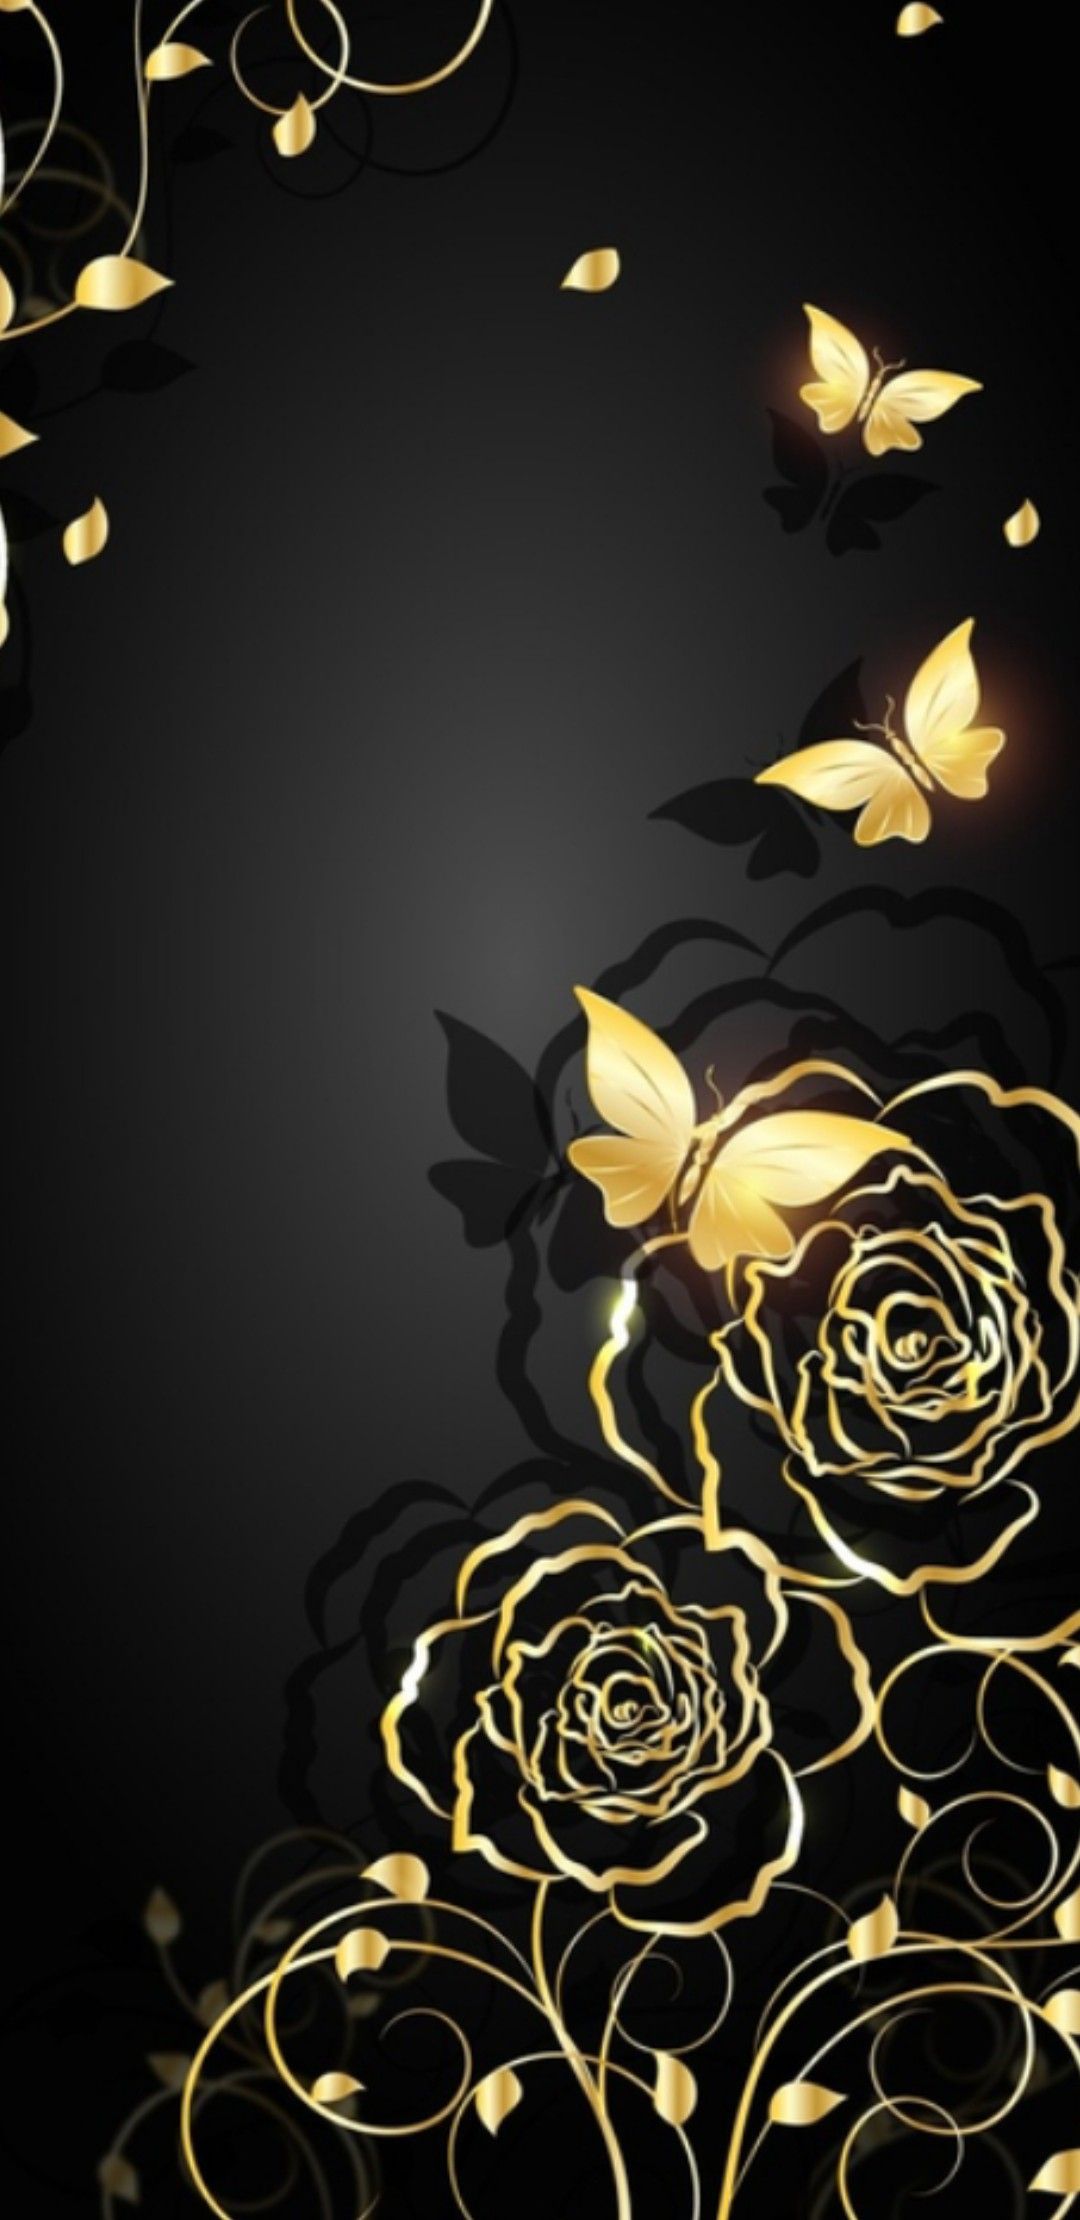 A gold rose and butterfly design on black background - Gold